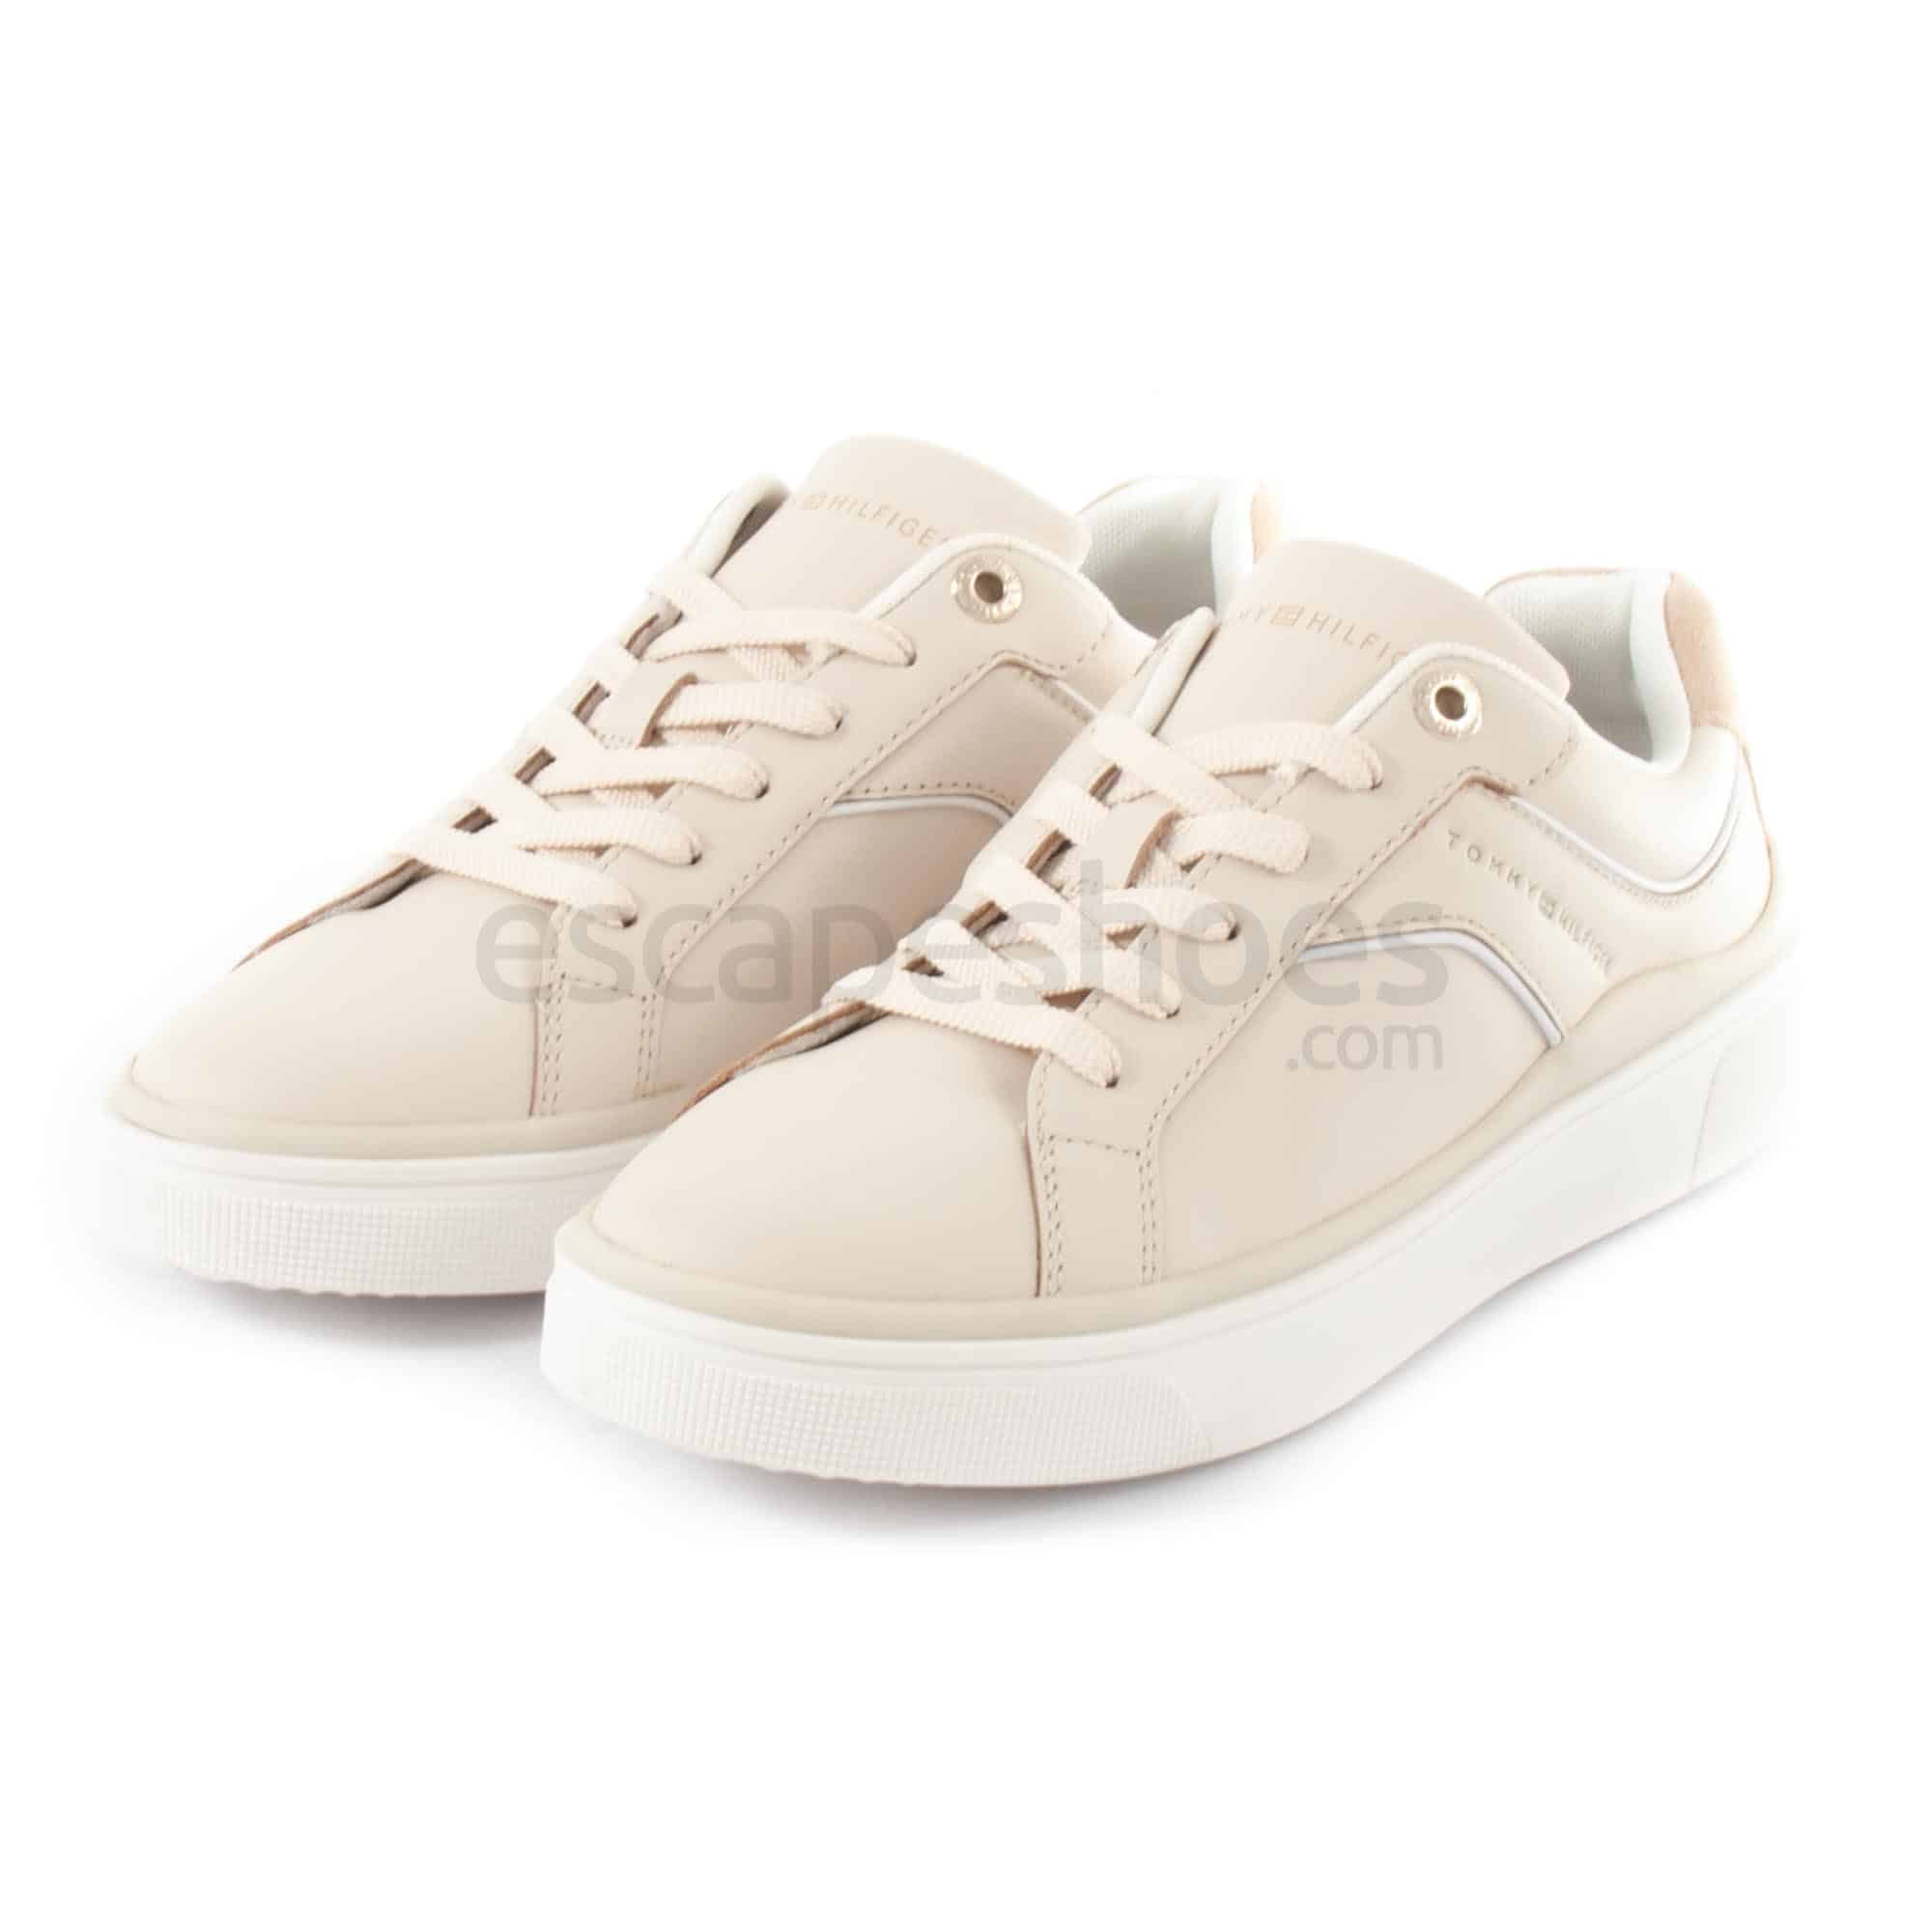 Tommy Hilfiger FASHION WEDGE SNEAKER White - Free Delivery with  Rubbersole.co.uk ! - Shoes Low top trainers Women £ 96.05